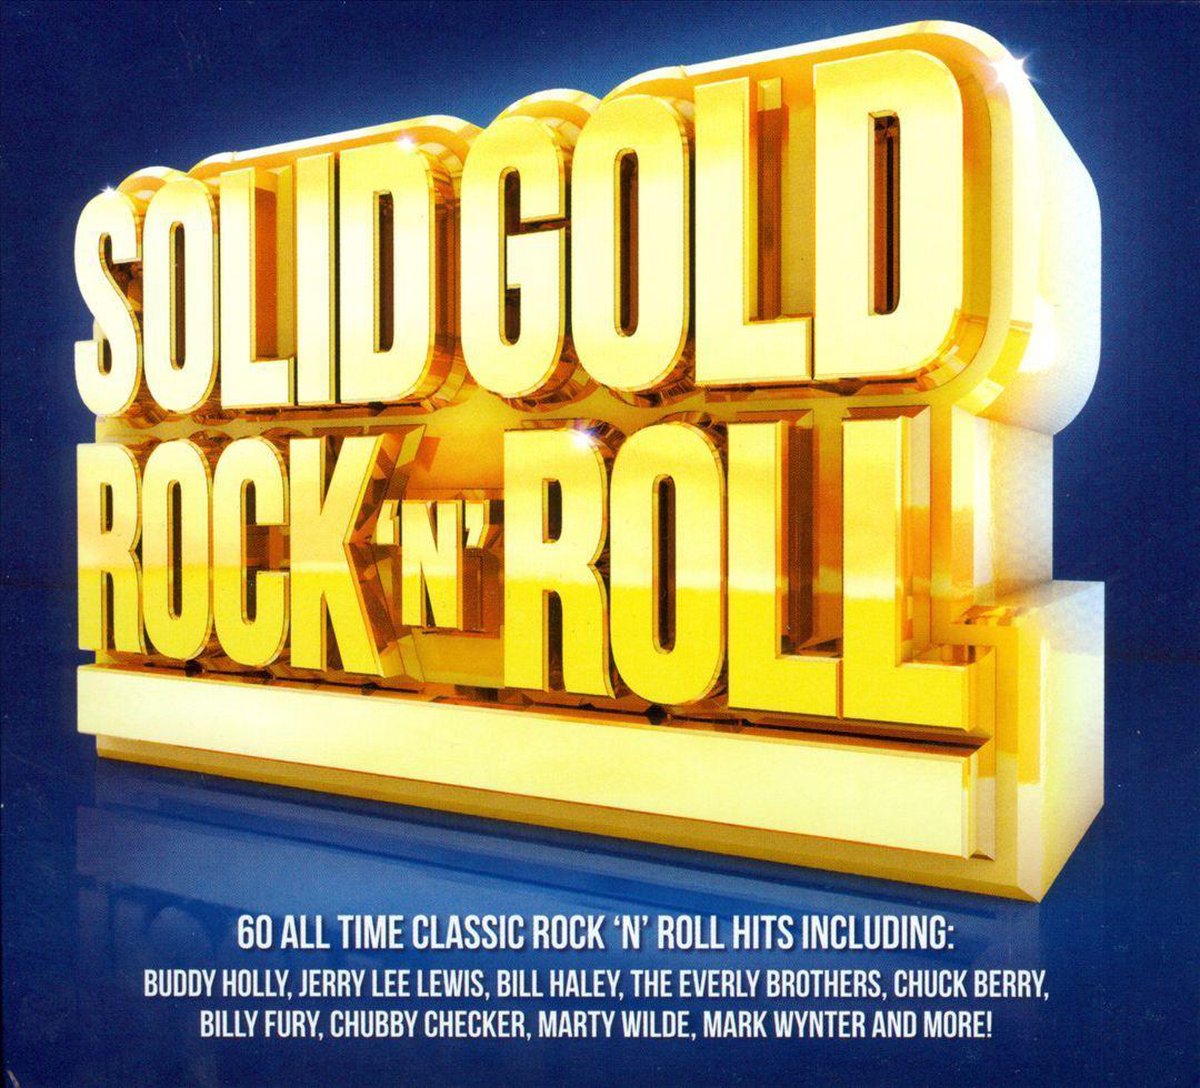 Solid Gold Rock 'N' Roll - various artists